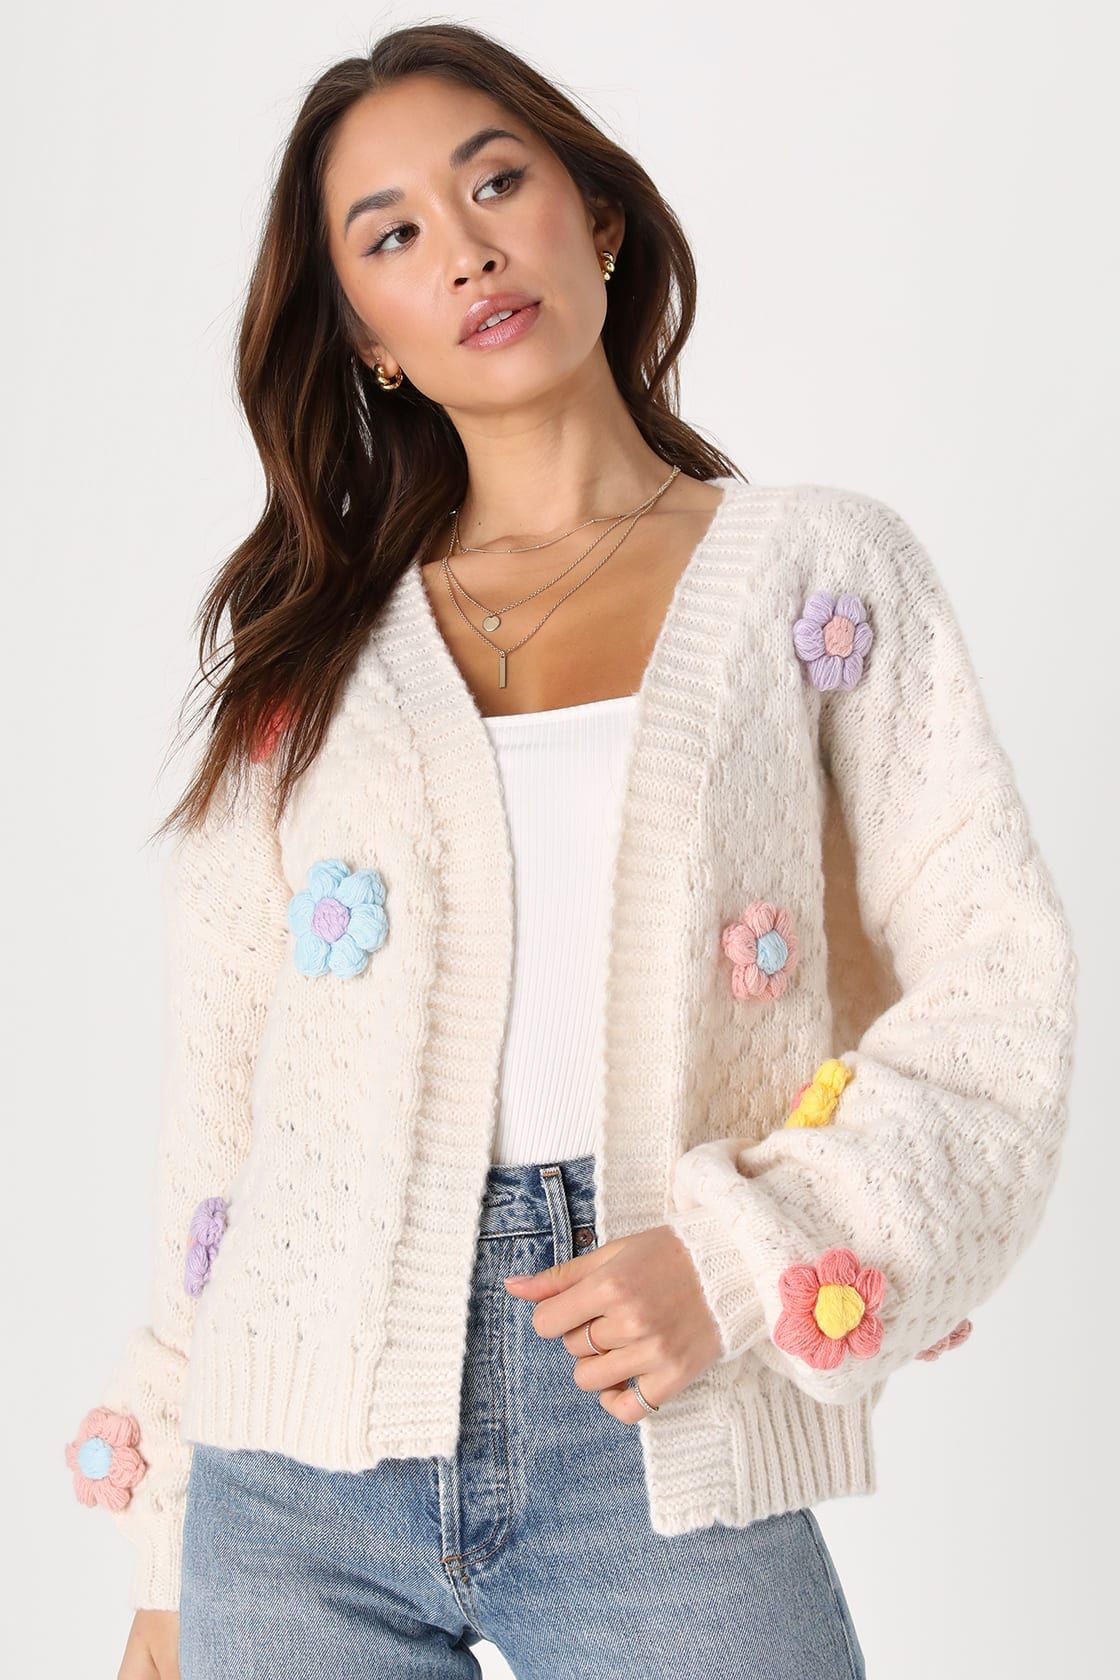 Chosen Charm Cream Knit Open-Front Embroidered Shrug Sweater | Lulus